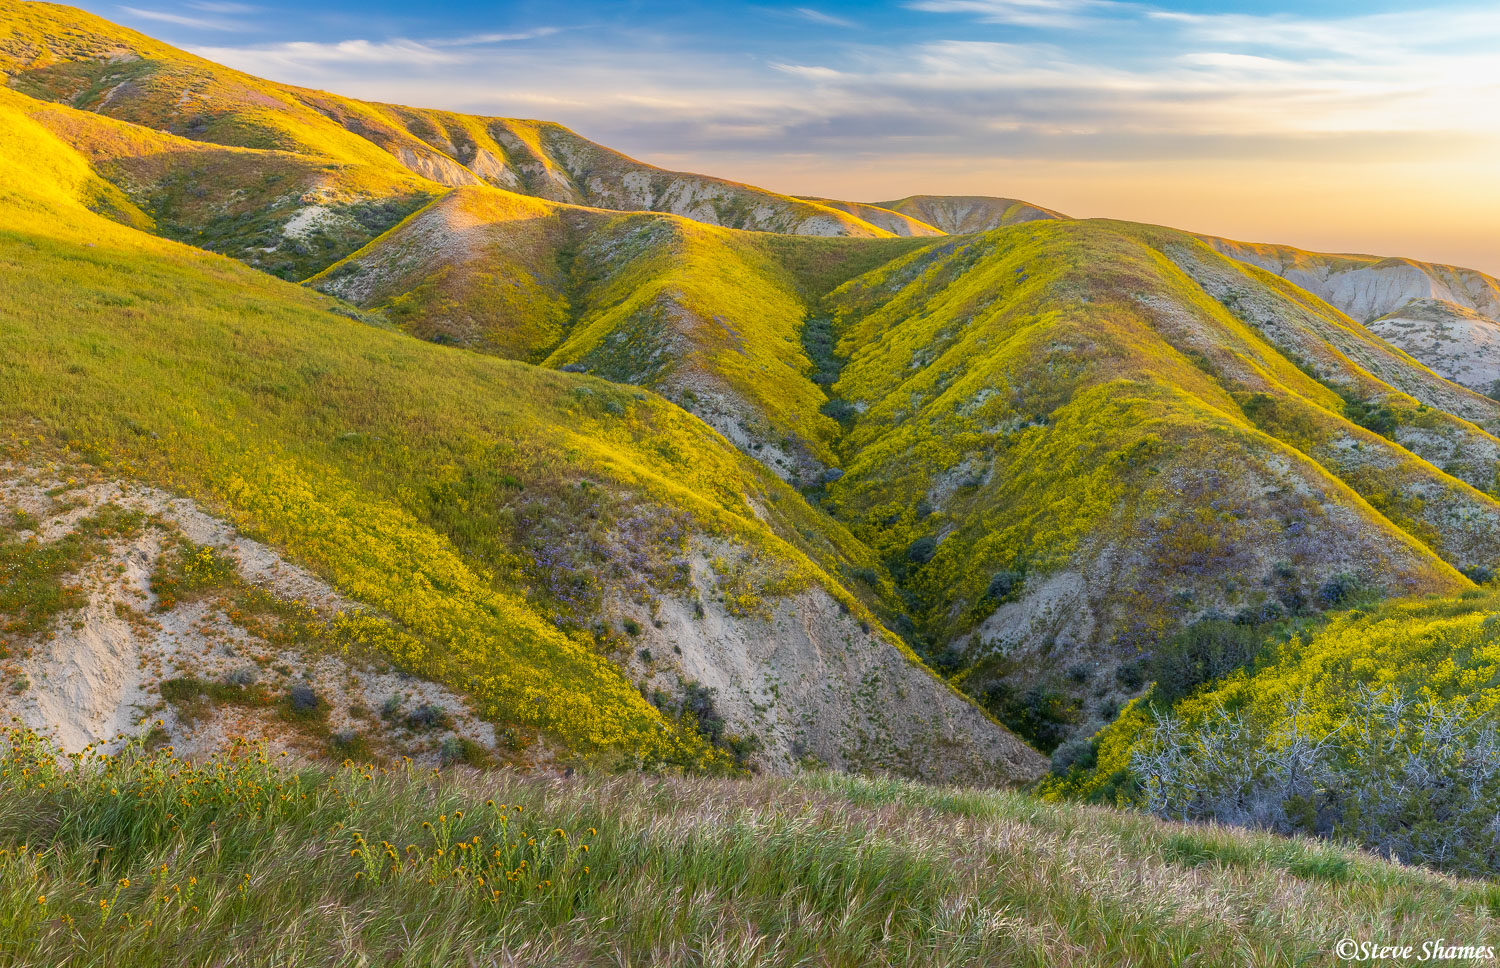 The flower covered hills at sunrise.